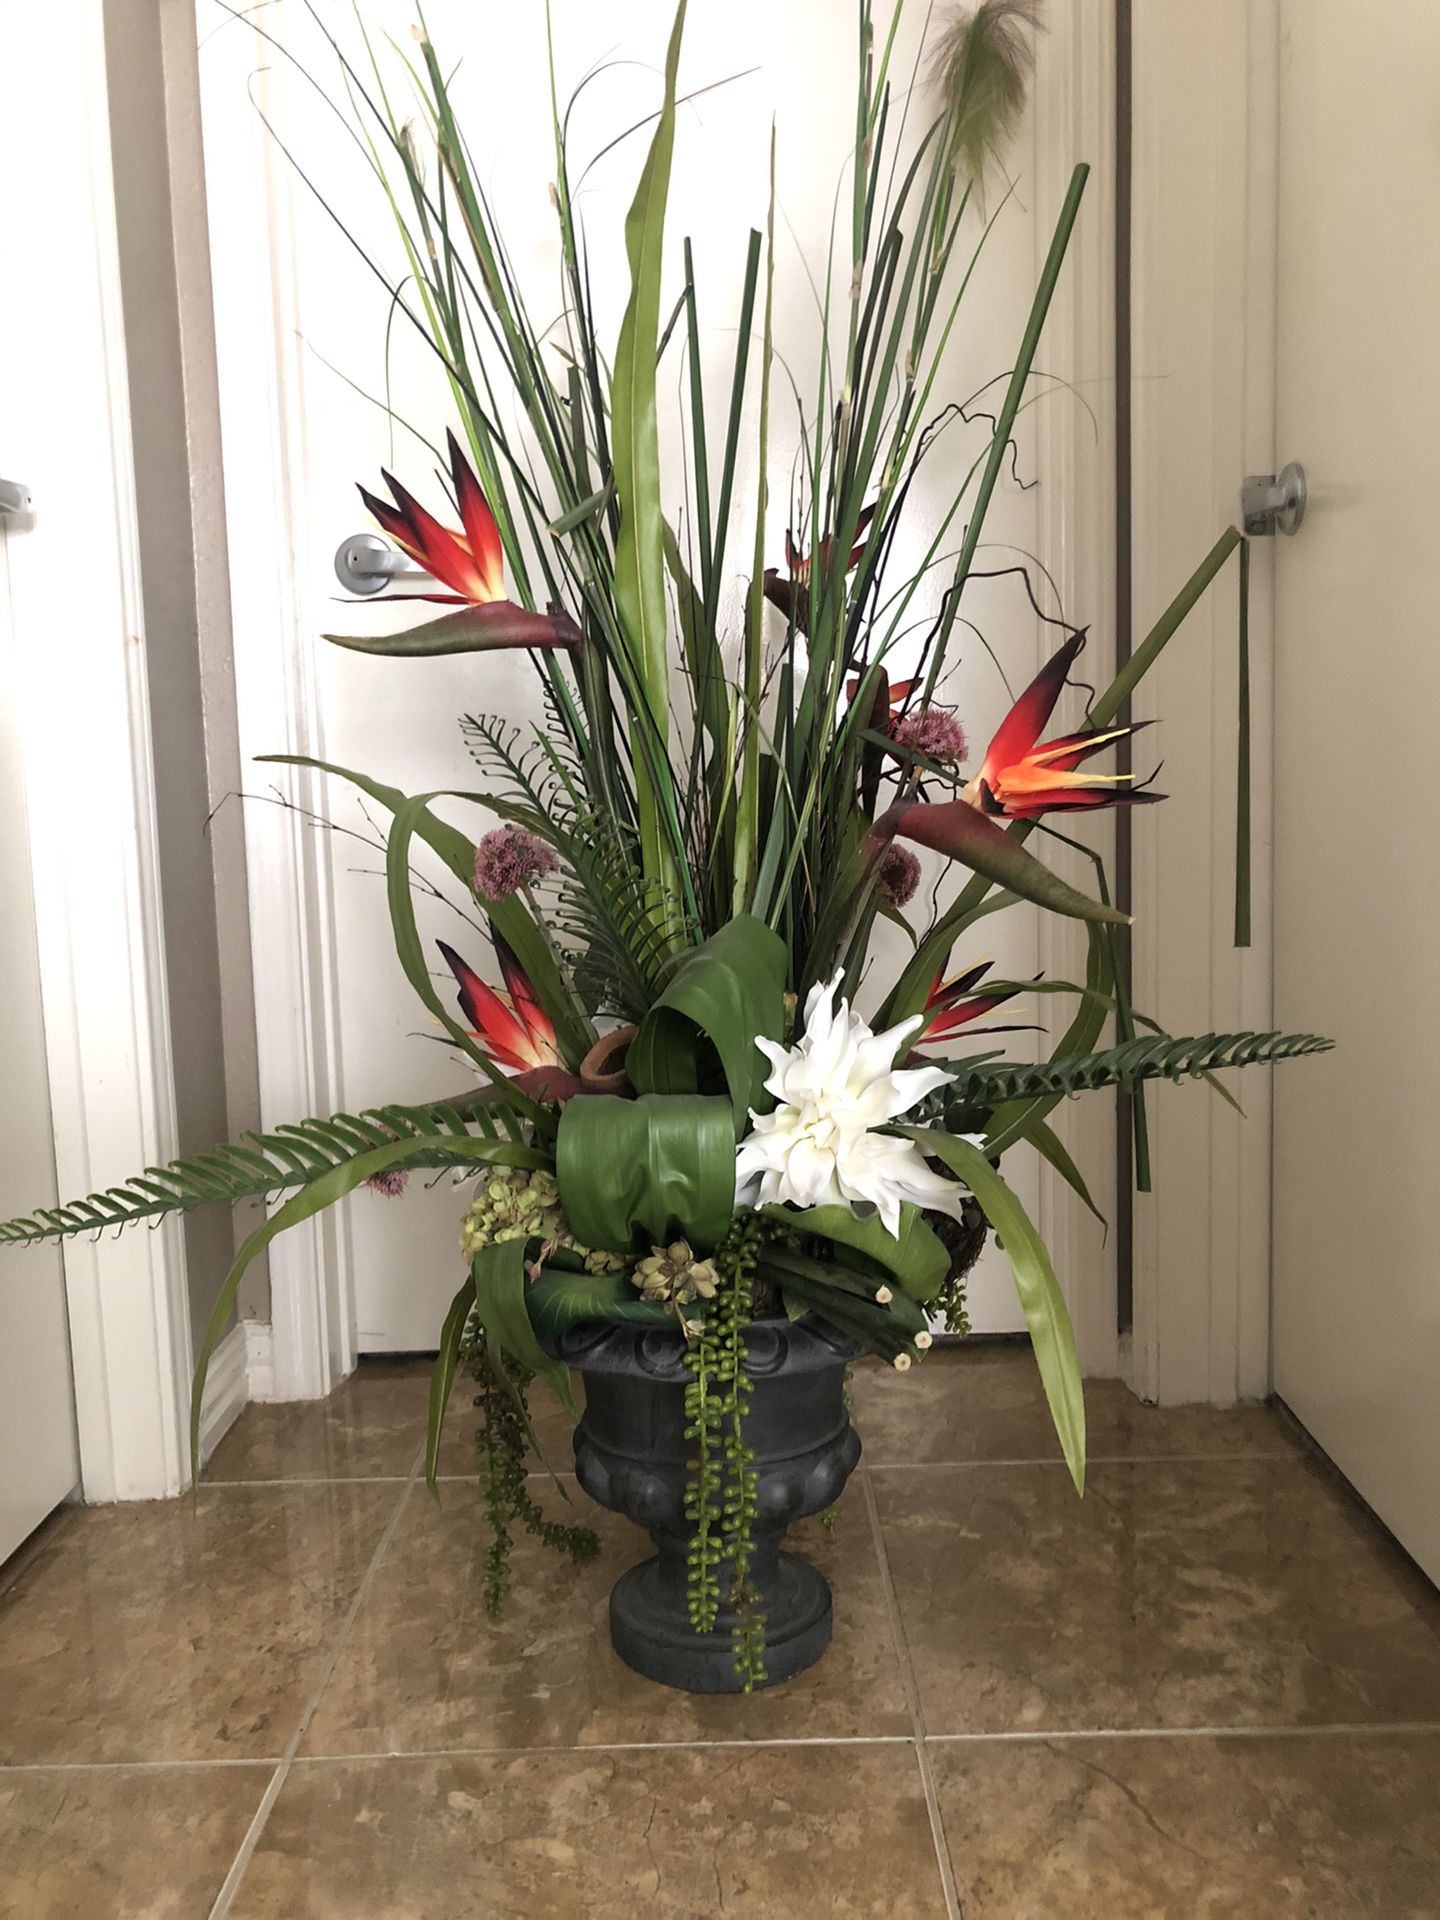 Large artificial plant -abt 60 inches tall